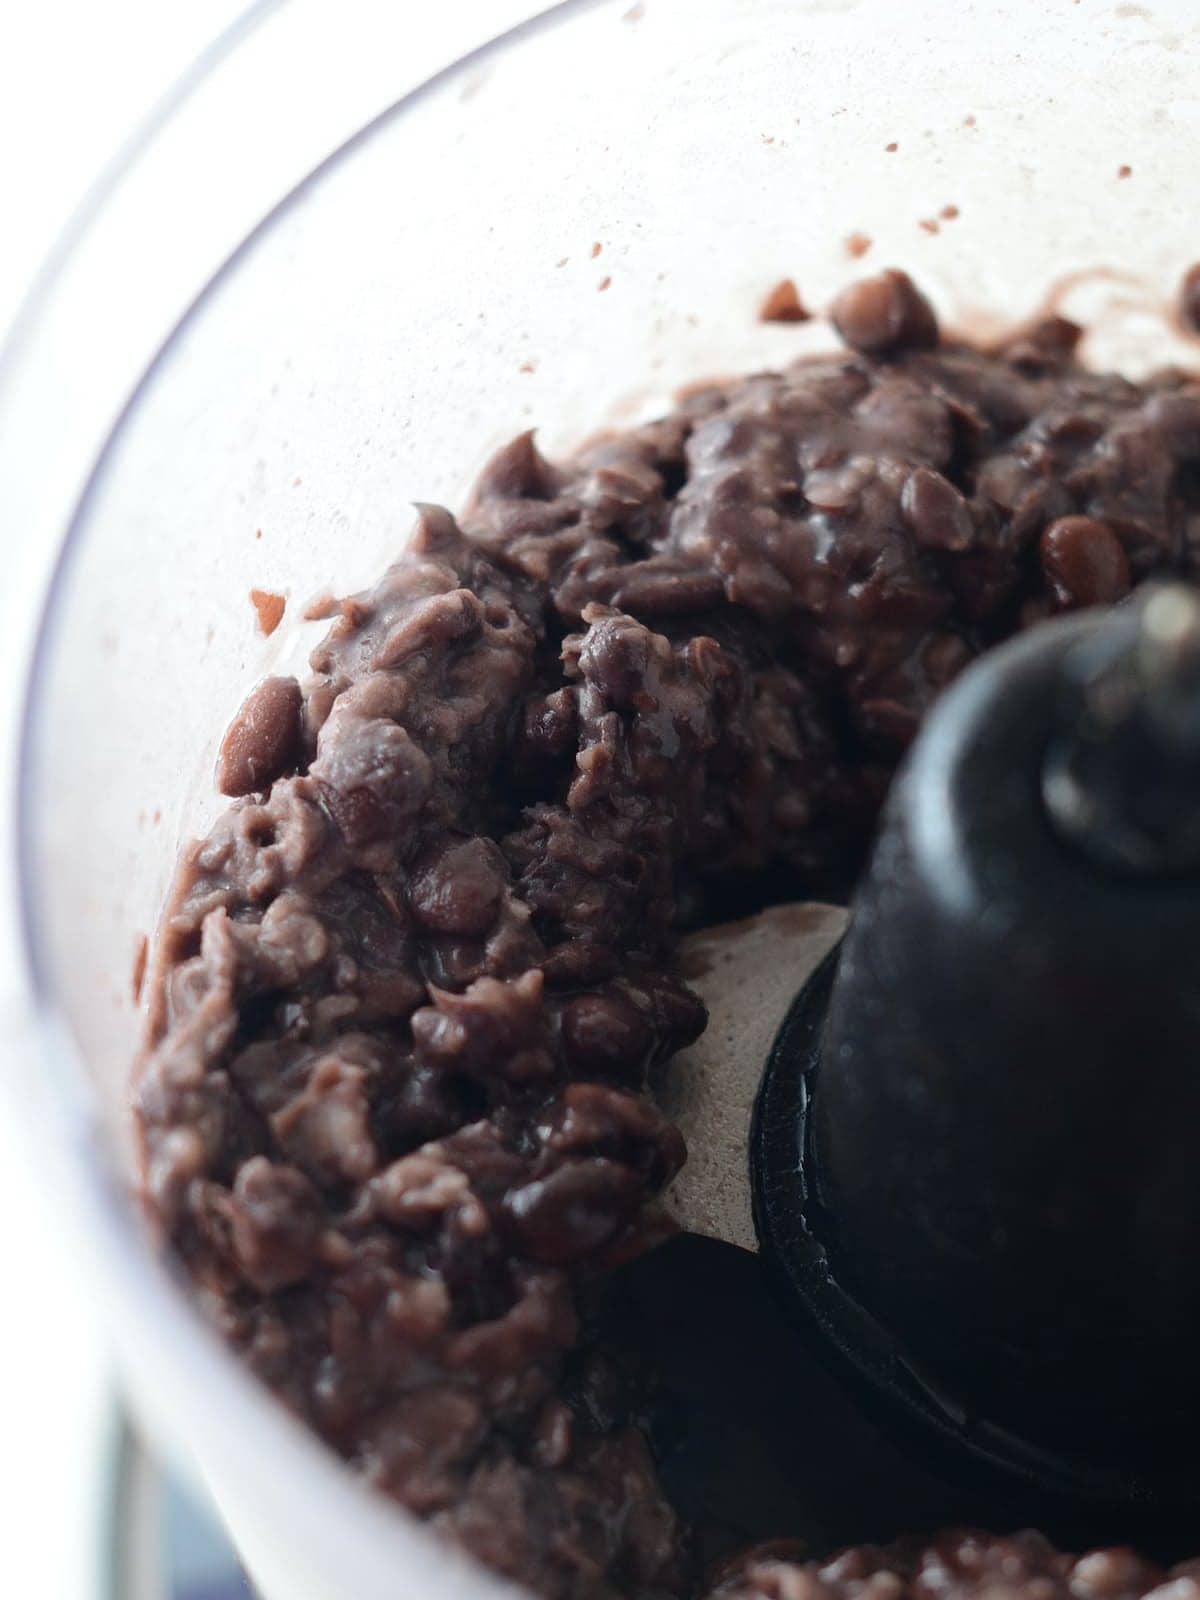 This is a photo of black beans in a food processor.